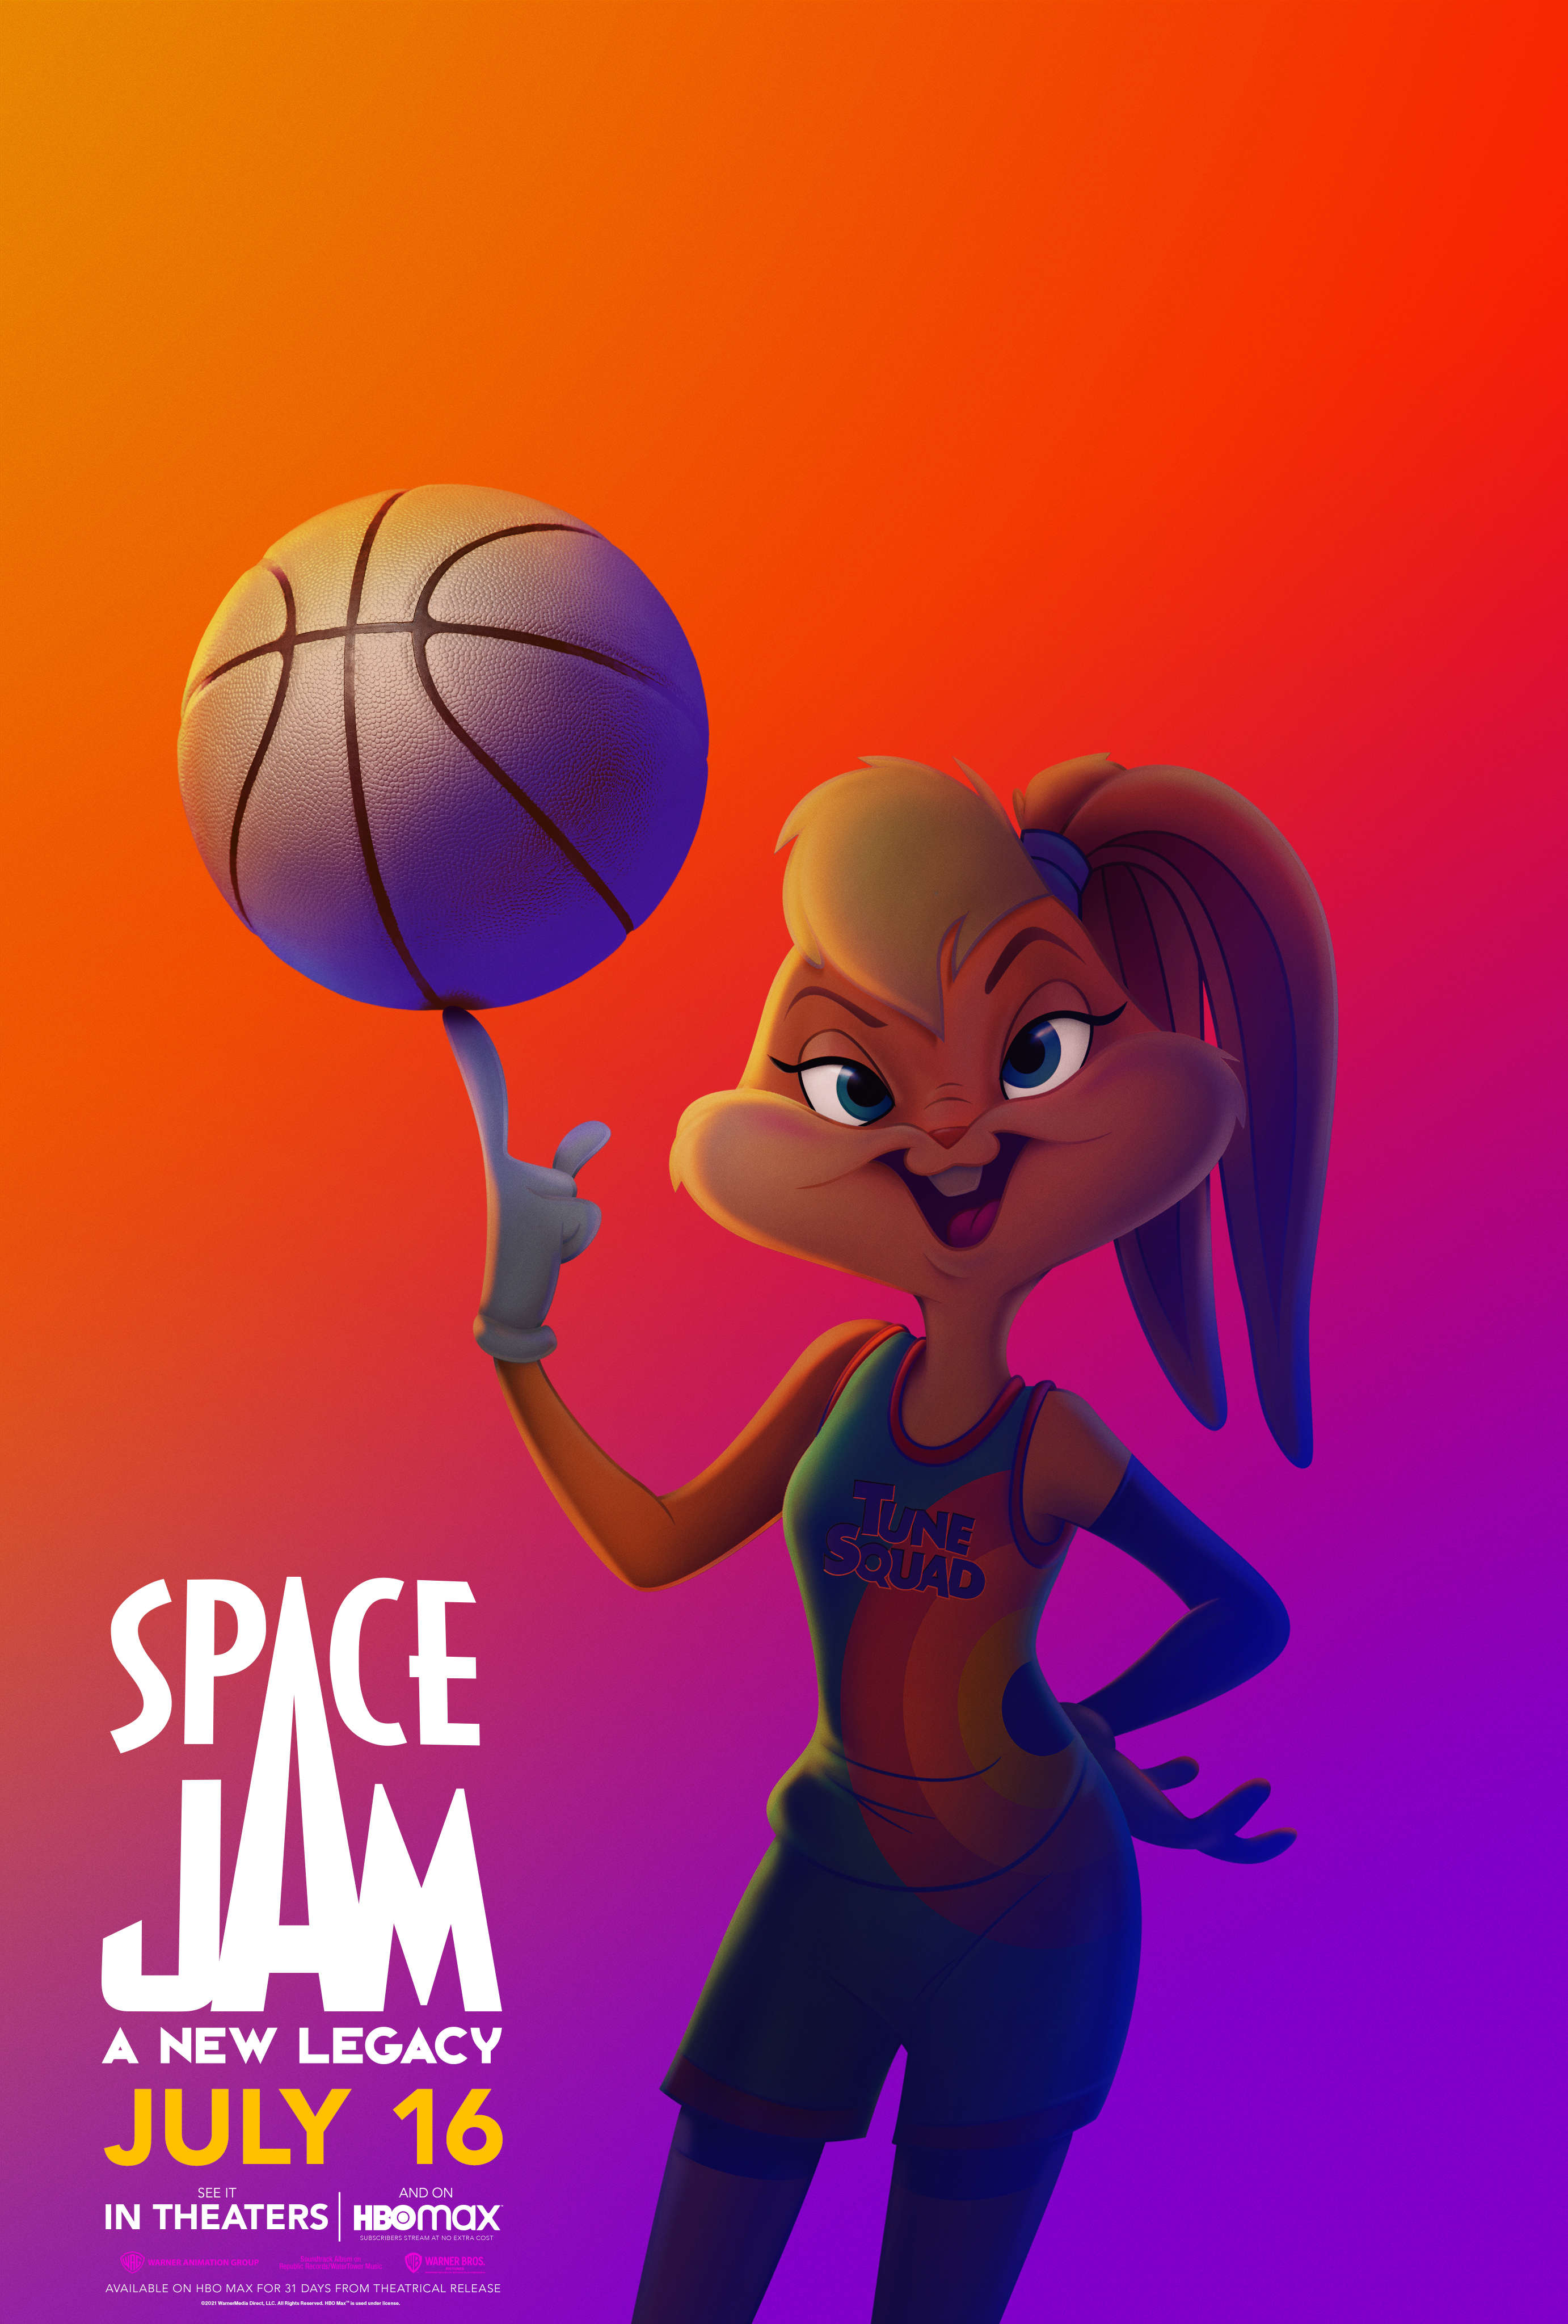 Cedric Joe on playing LeBron James' son in Space Jam: A New Legacy